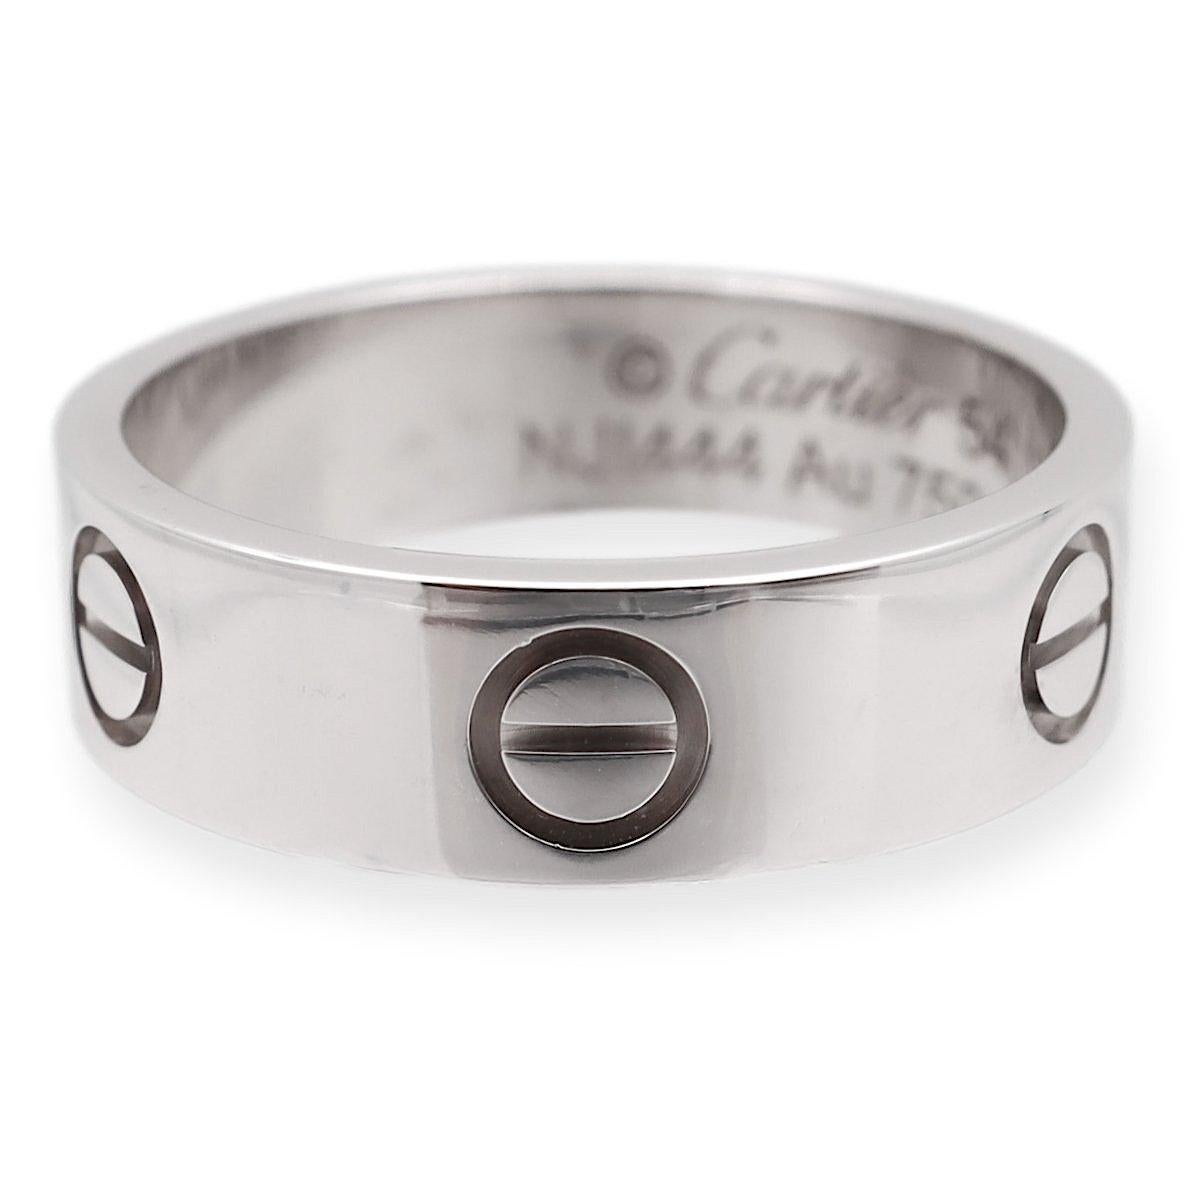 Cartier ring from the LOVE collection finely crafted in 18 white gold with screw motifs. Measures 5.5 mm wide. Includes Certificate of Authenticity. Ring is fully hallmarked with logo , serial numbers, size and metal content.

Ring